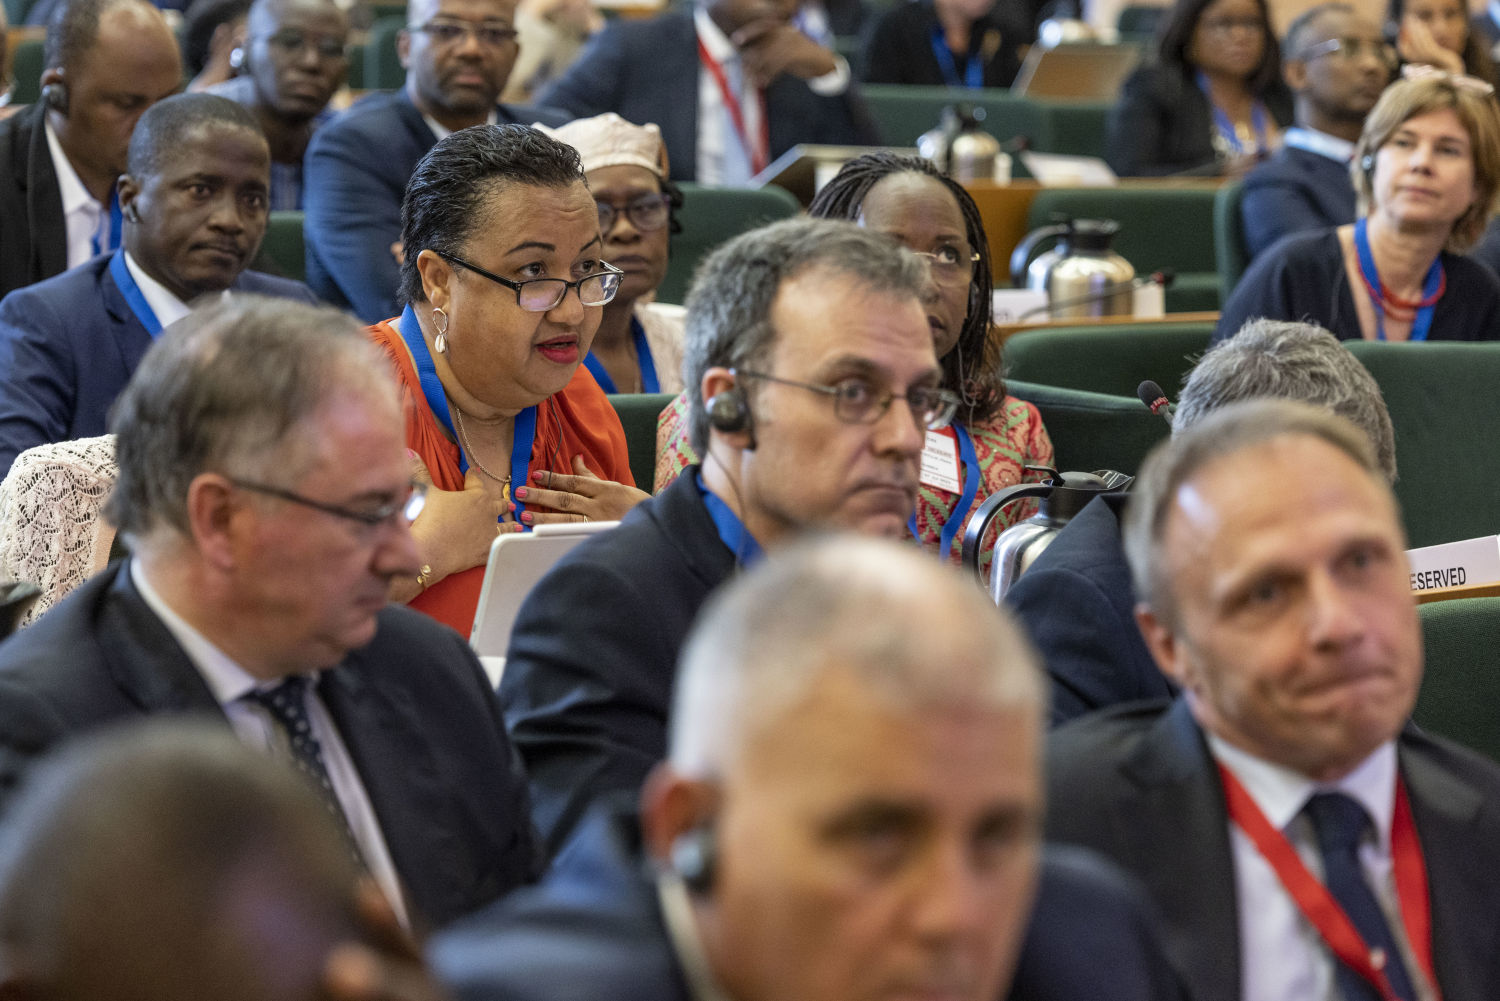 5th AU - EU Agricultural Ministerial Conference